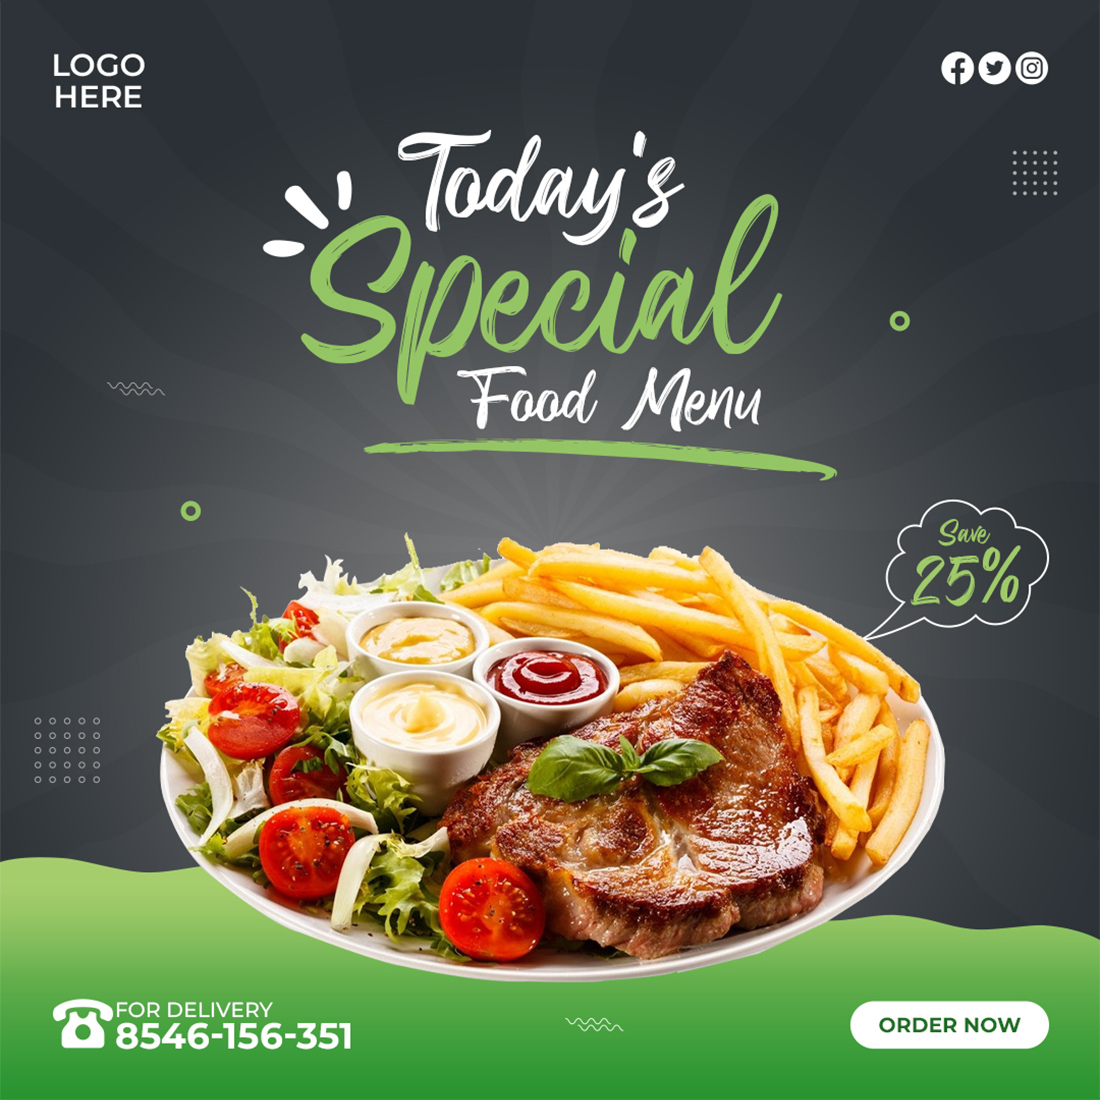 2 Today's Special Food Menu Restaurant Social Media Banner Post Templates preview image.